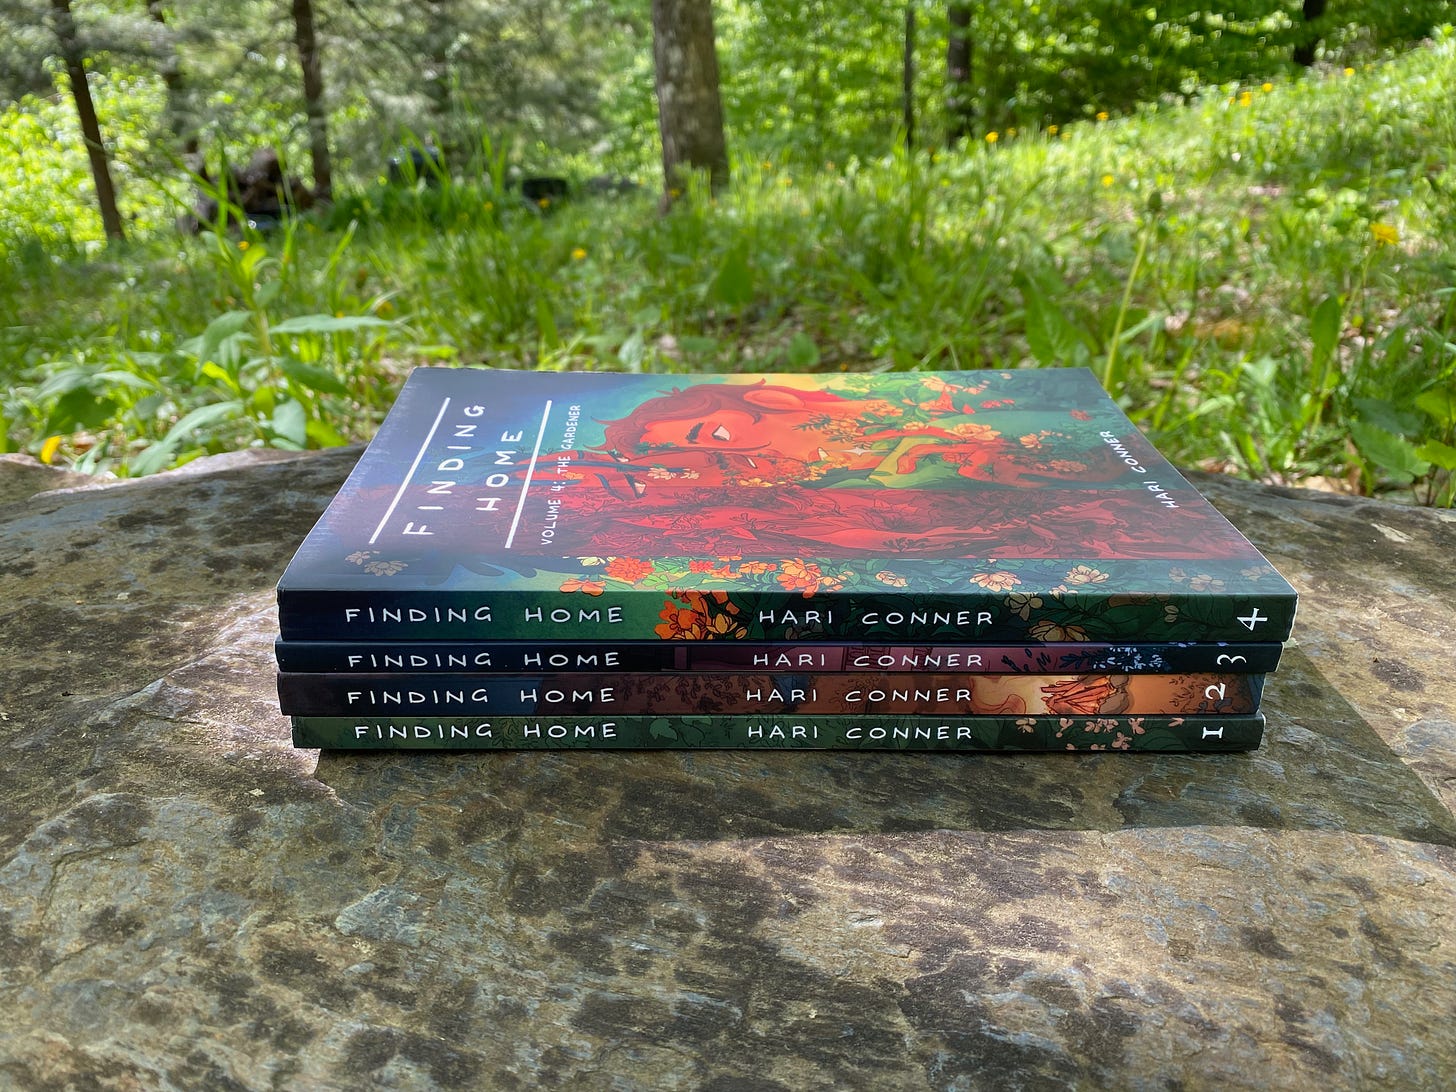 Four paperback volumes of Finding Home stacked on a flat rock, with bright grass and trees in the background.